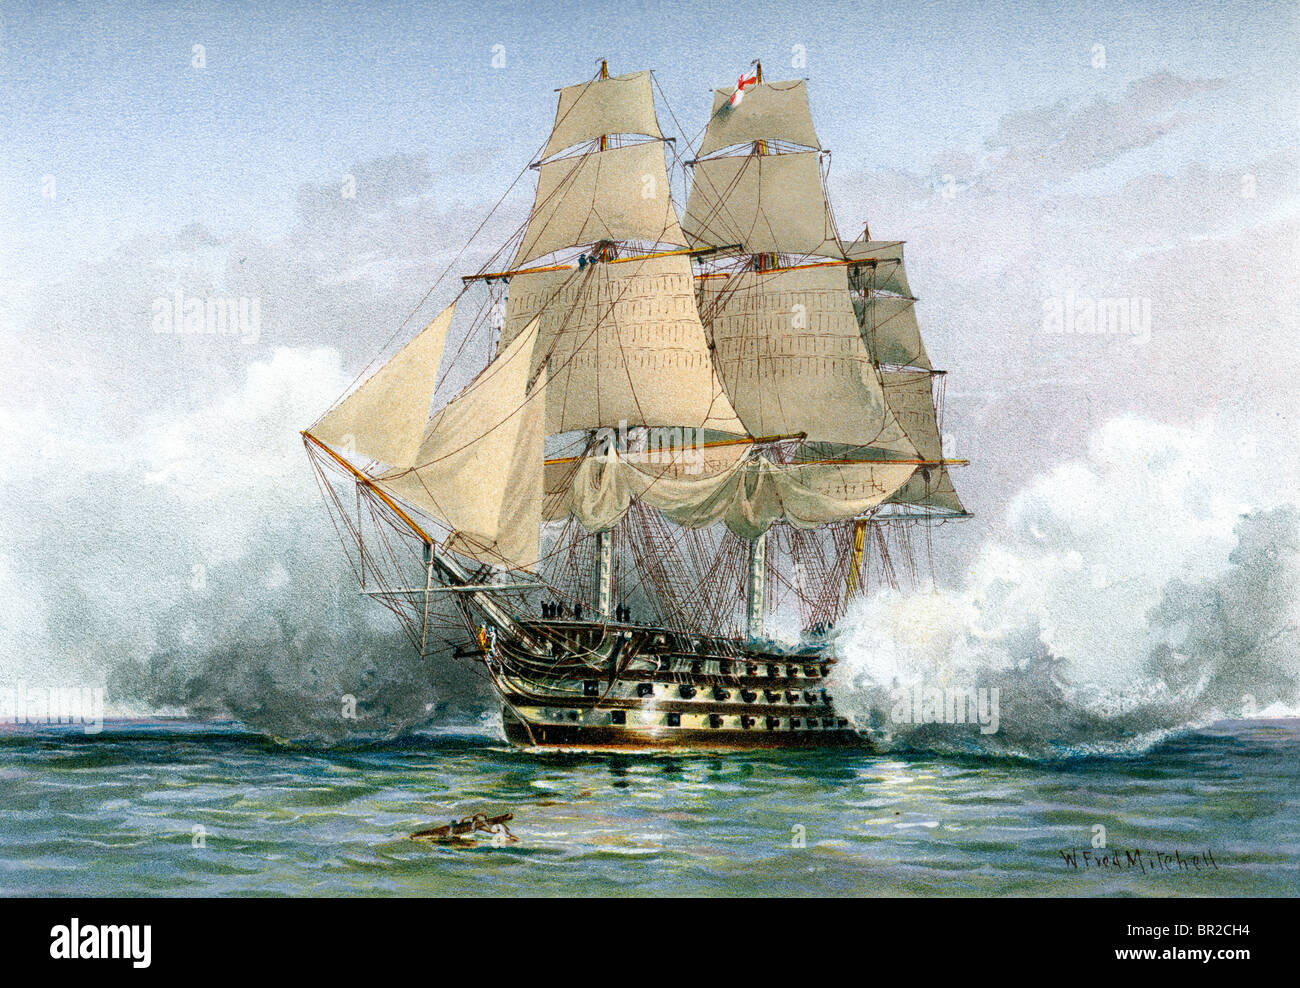 HMS Victory first rate ship of the line of the Royal Navy Lord Nelson's flagship at the Battle of Trafalgar. Stock Photo